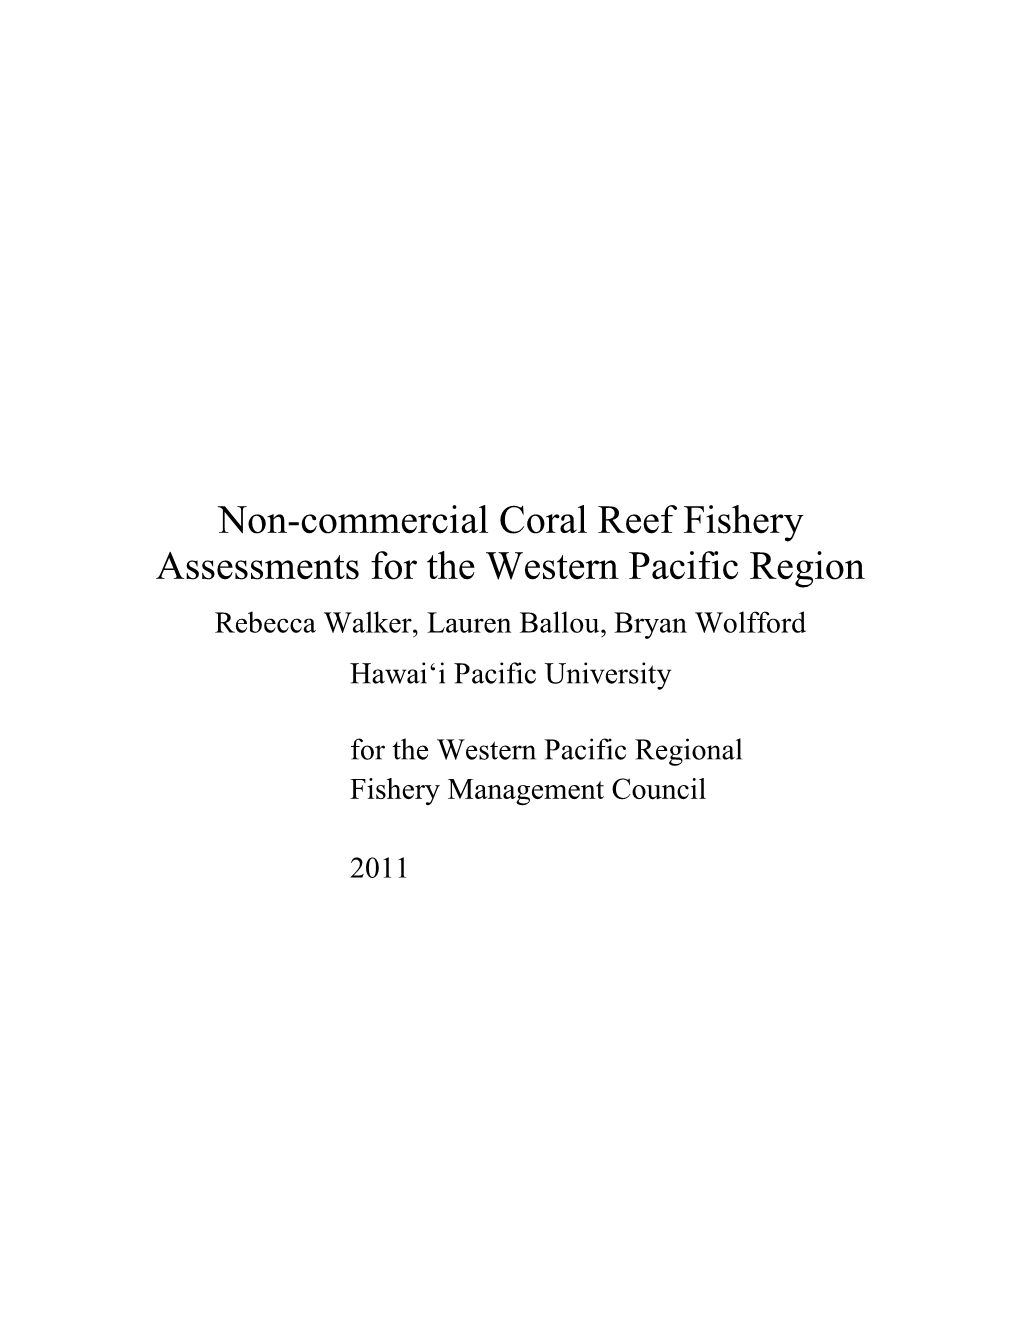 Non-Commercial Coral Reef Fishery Assessments for the Western Pacific Region Rebecca Walker, Lauren Ballou, Bryan Wolfford Hawai‘I Pacific University